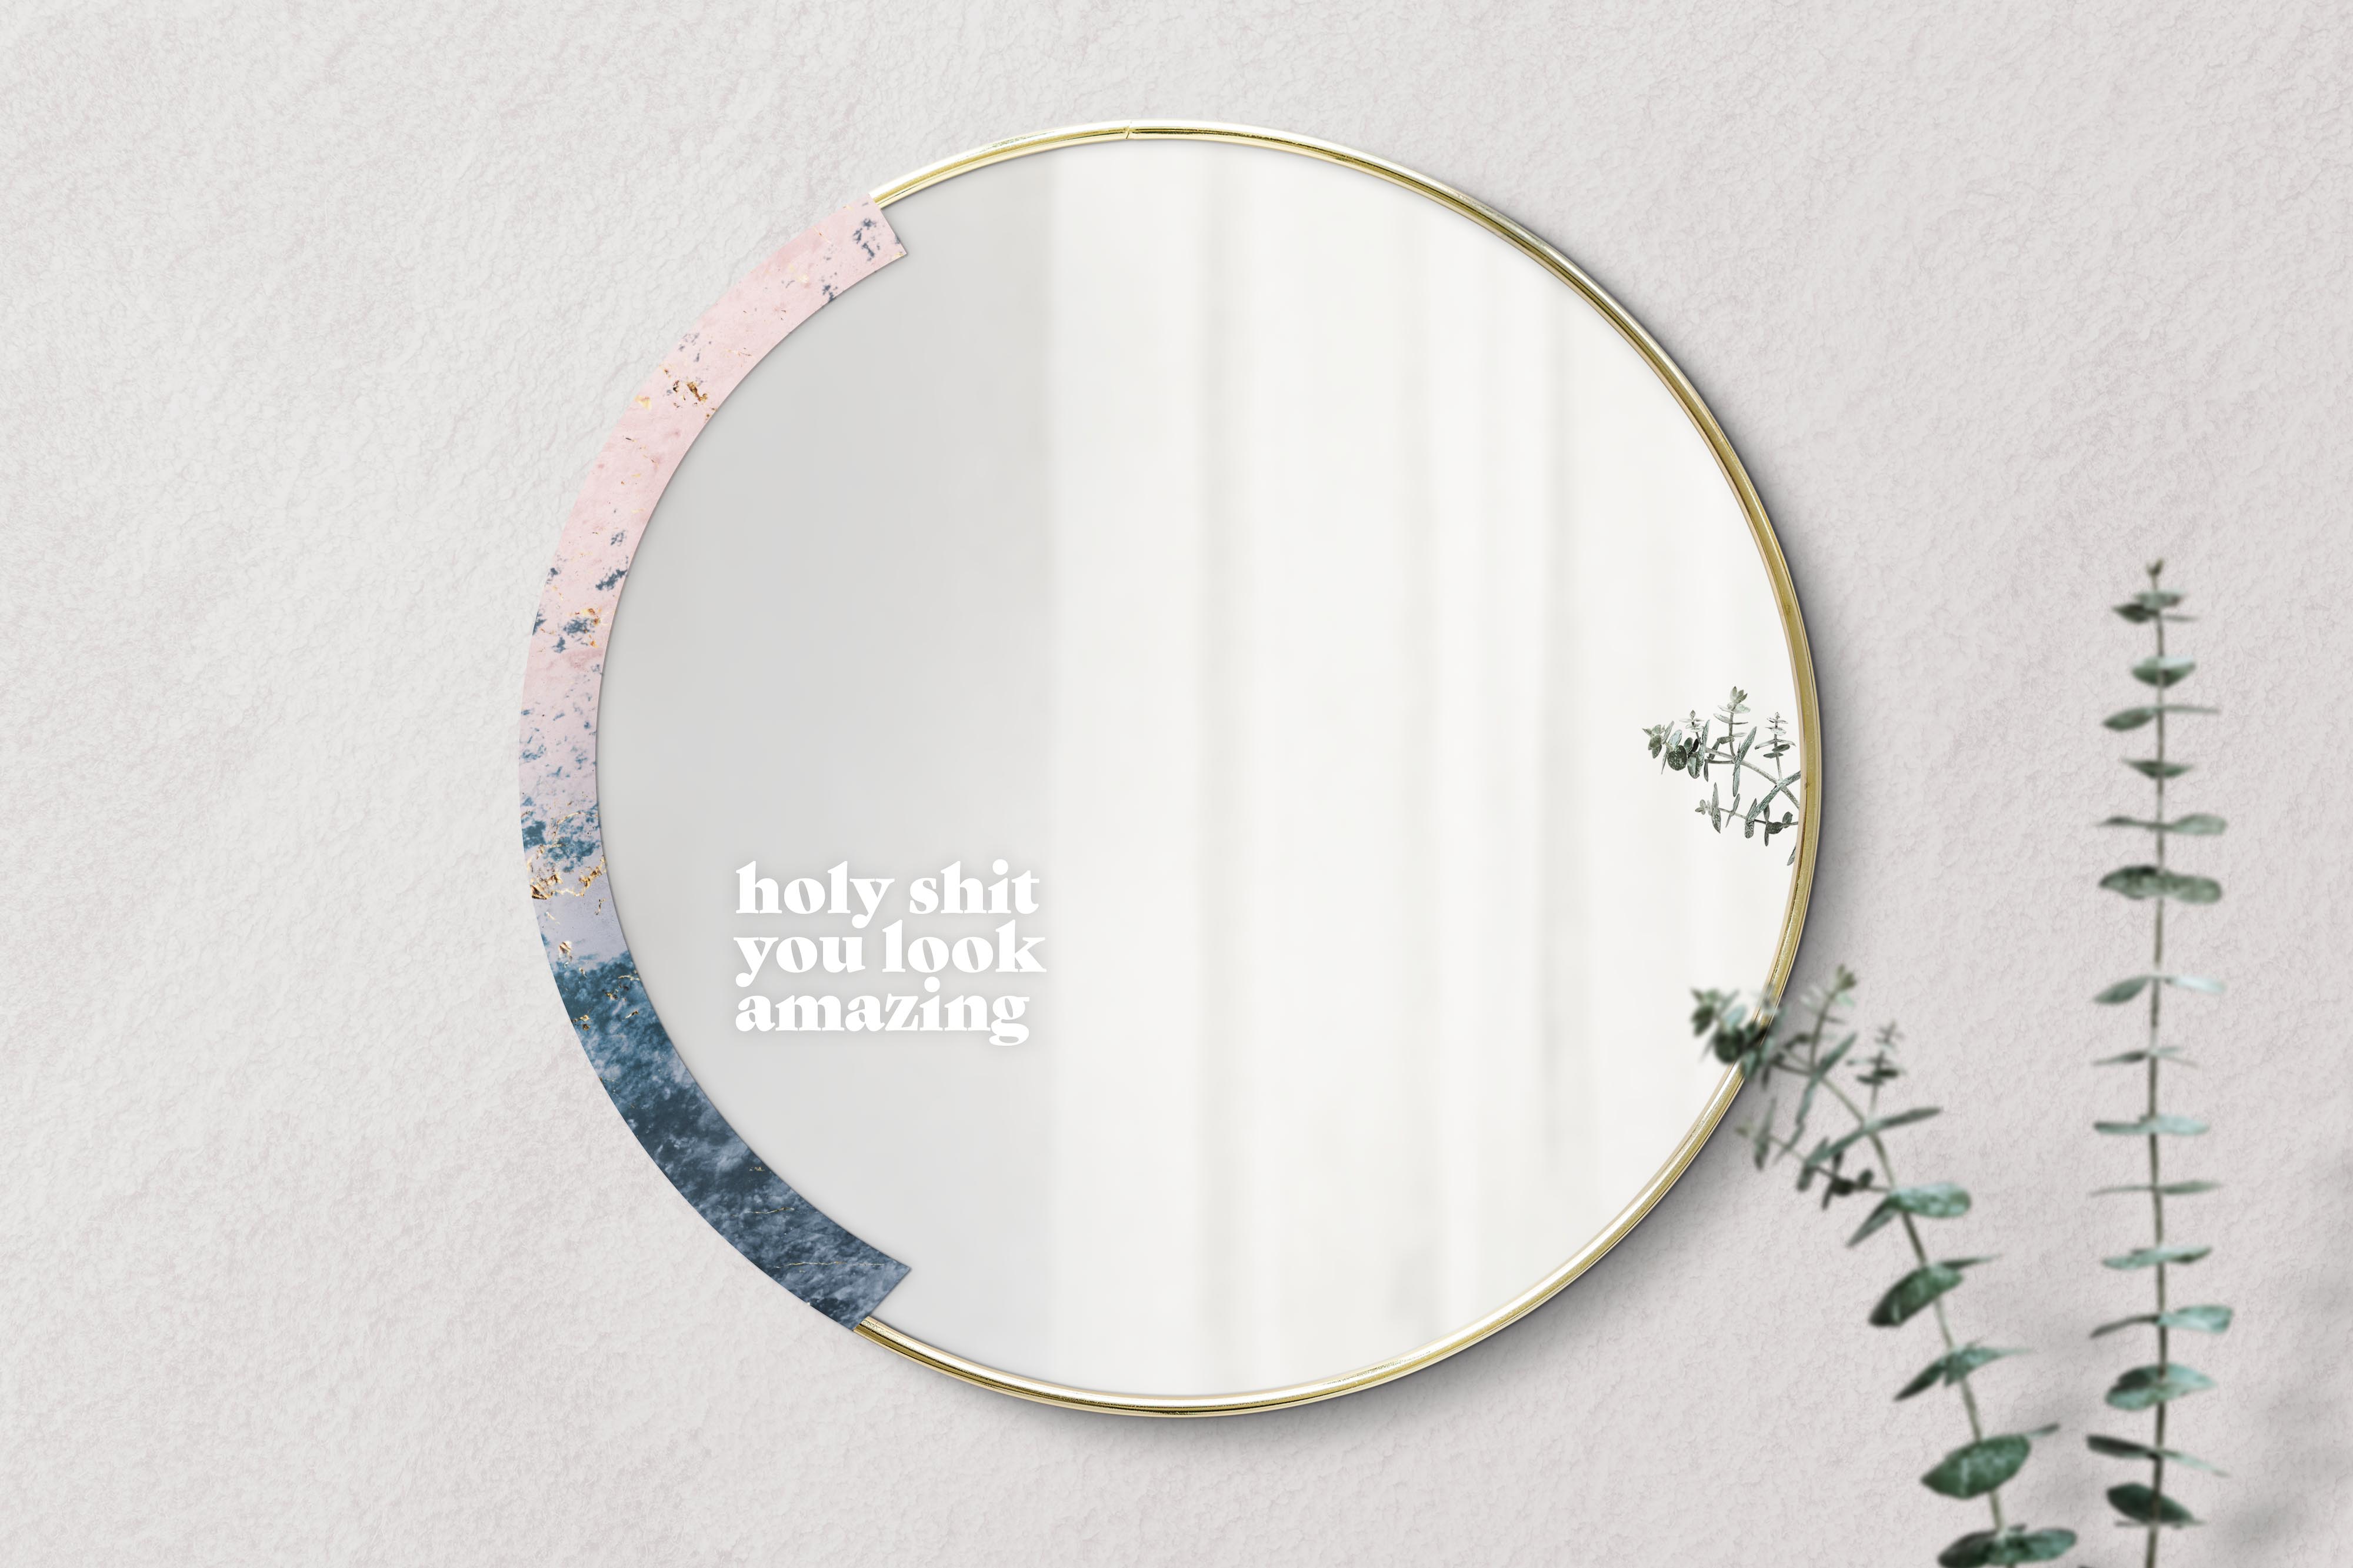 holy shit you look amazing - Affirmation Mirror Sticker